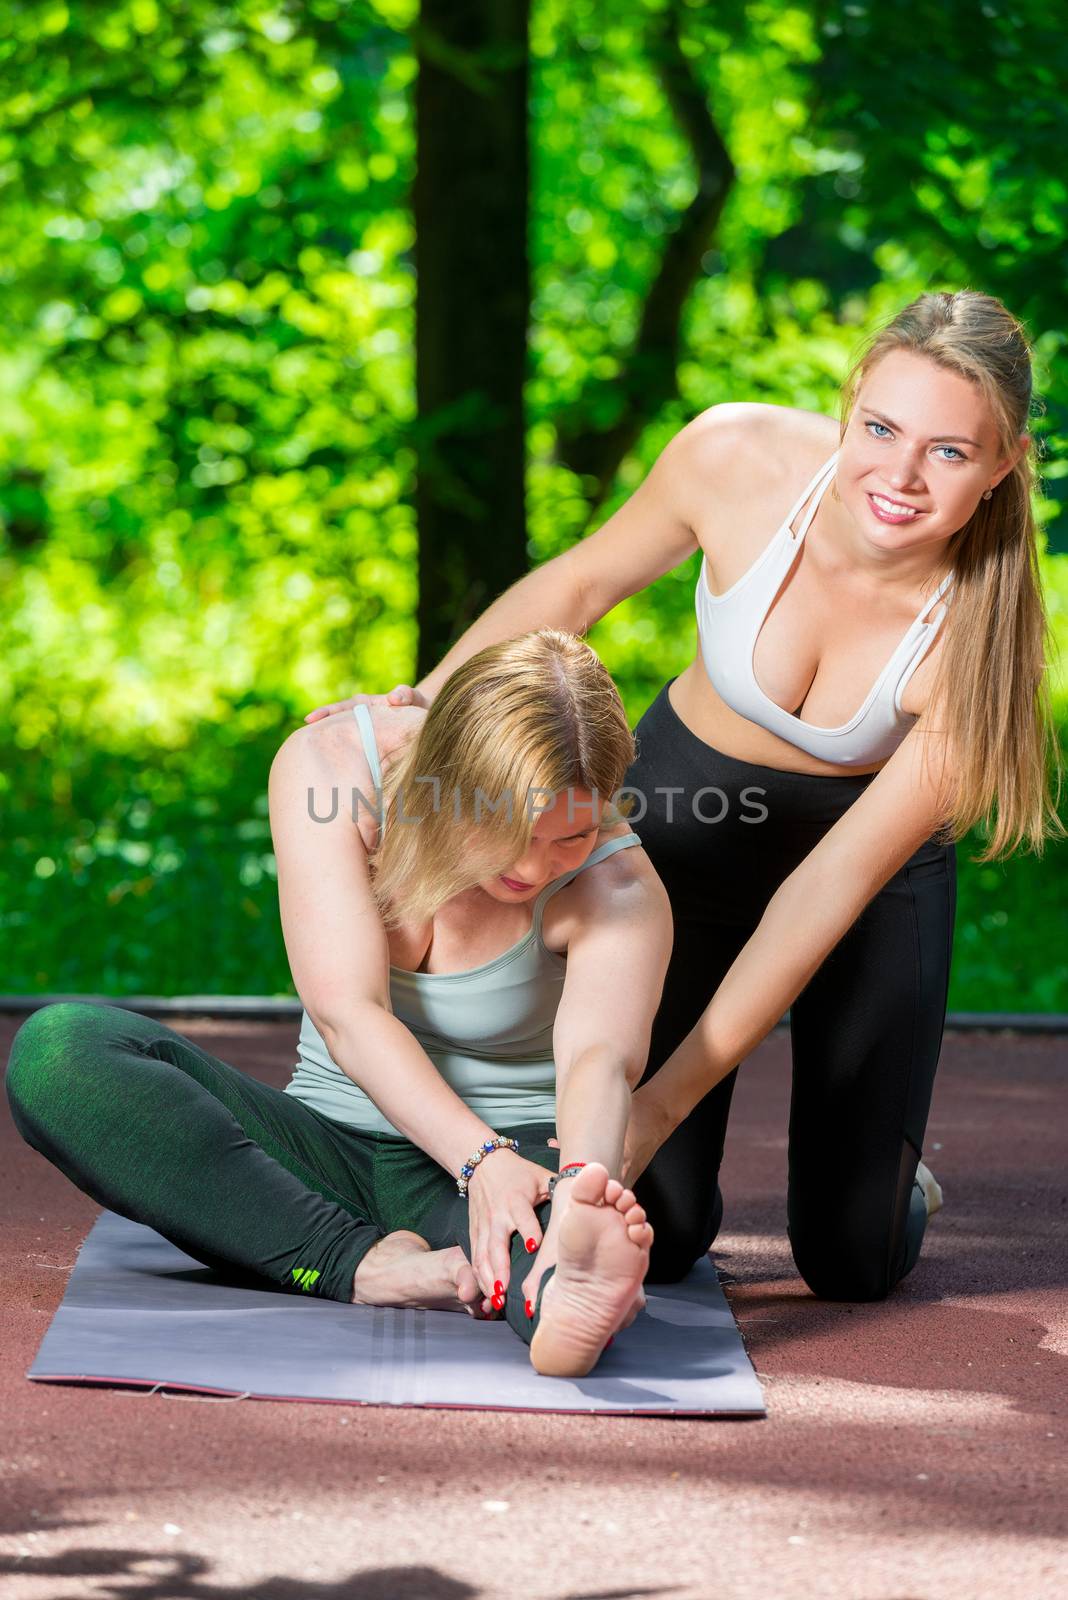 in the park, a yoga trainer helps a woman to do stretching exercises